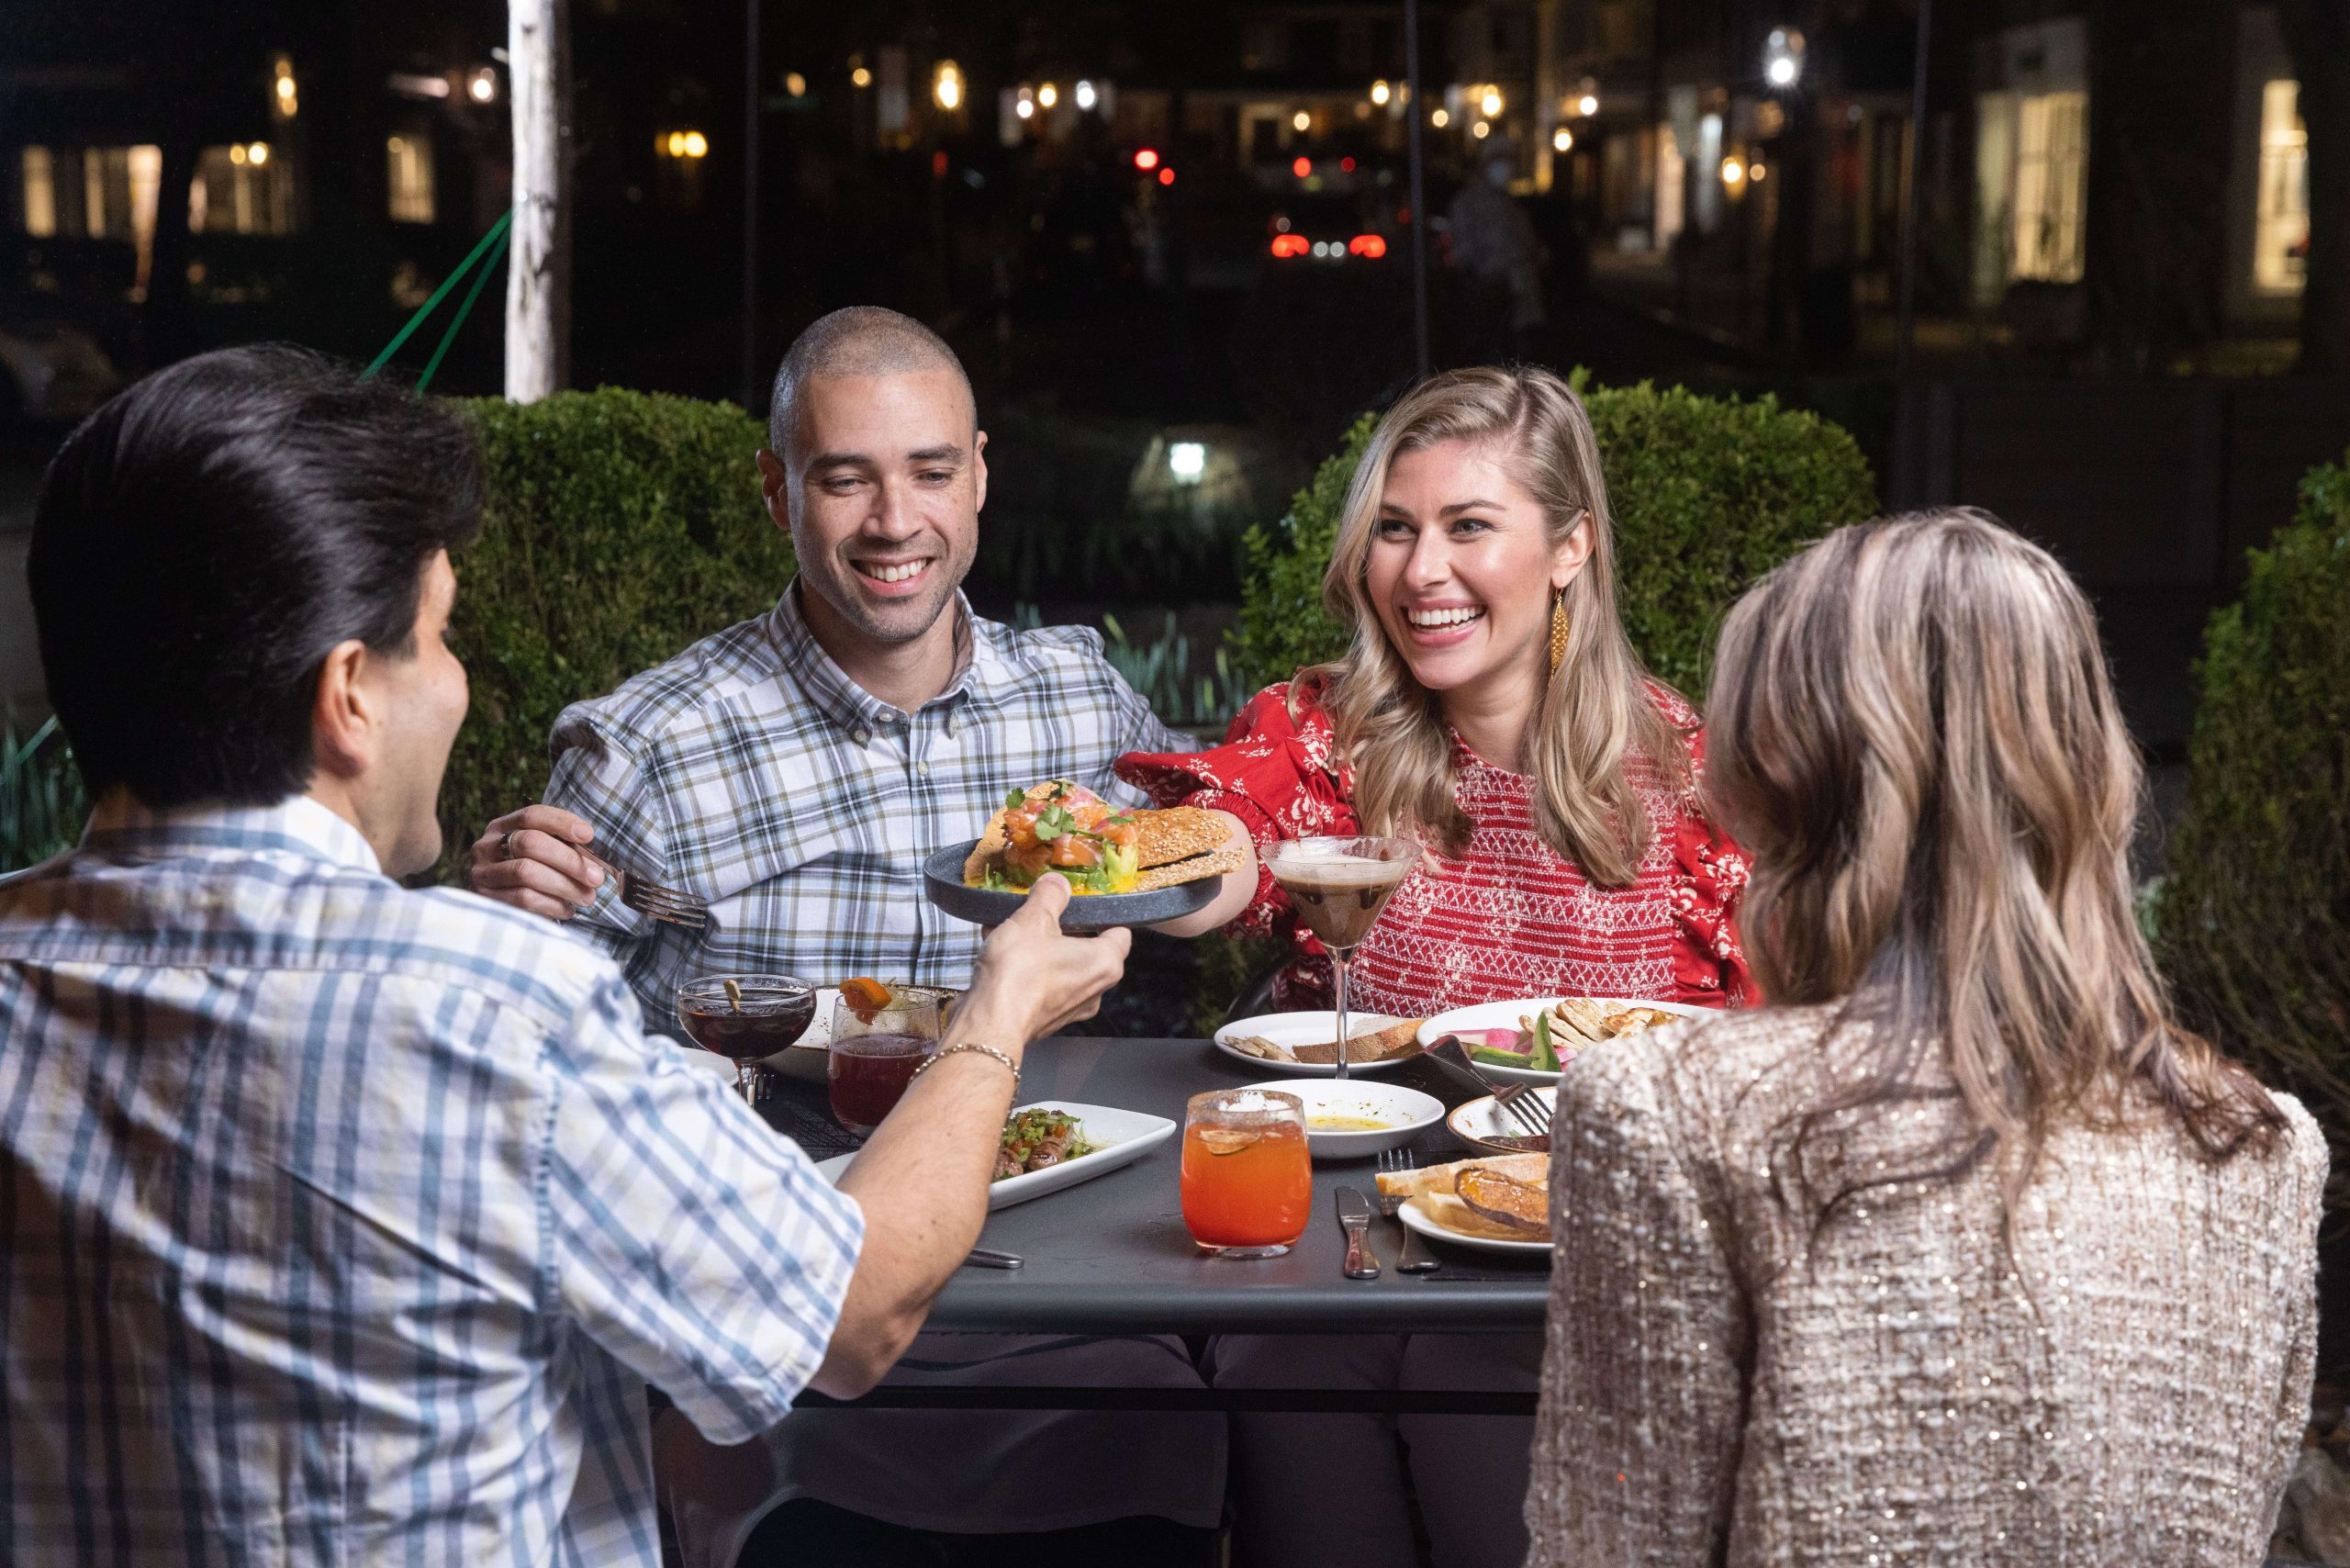 couples passing platters and enjoying an evening outside dining